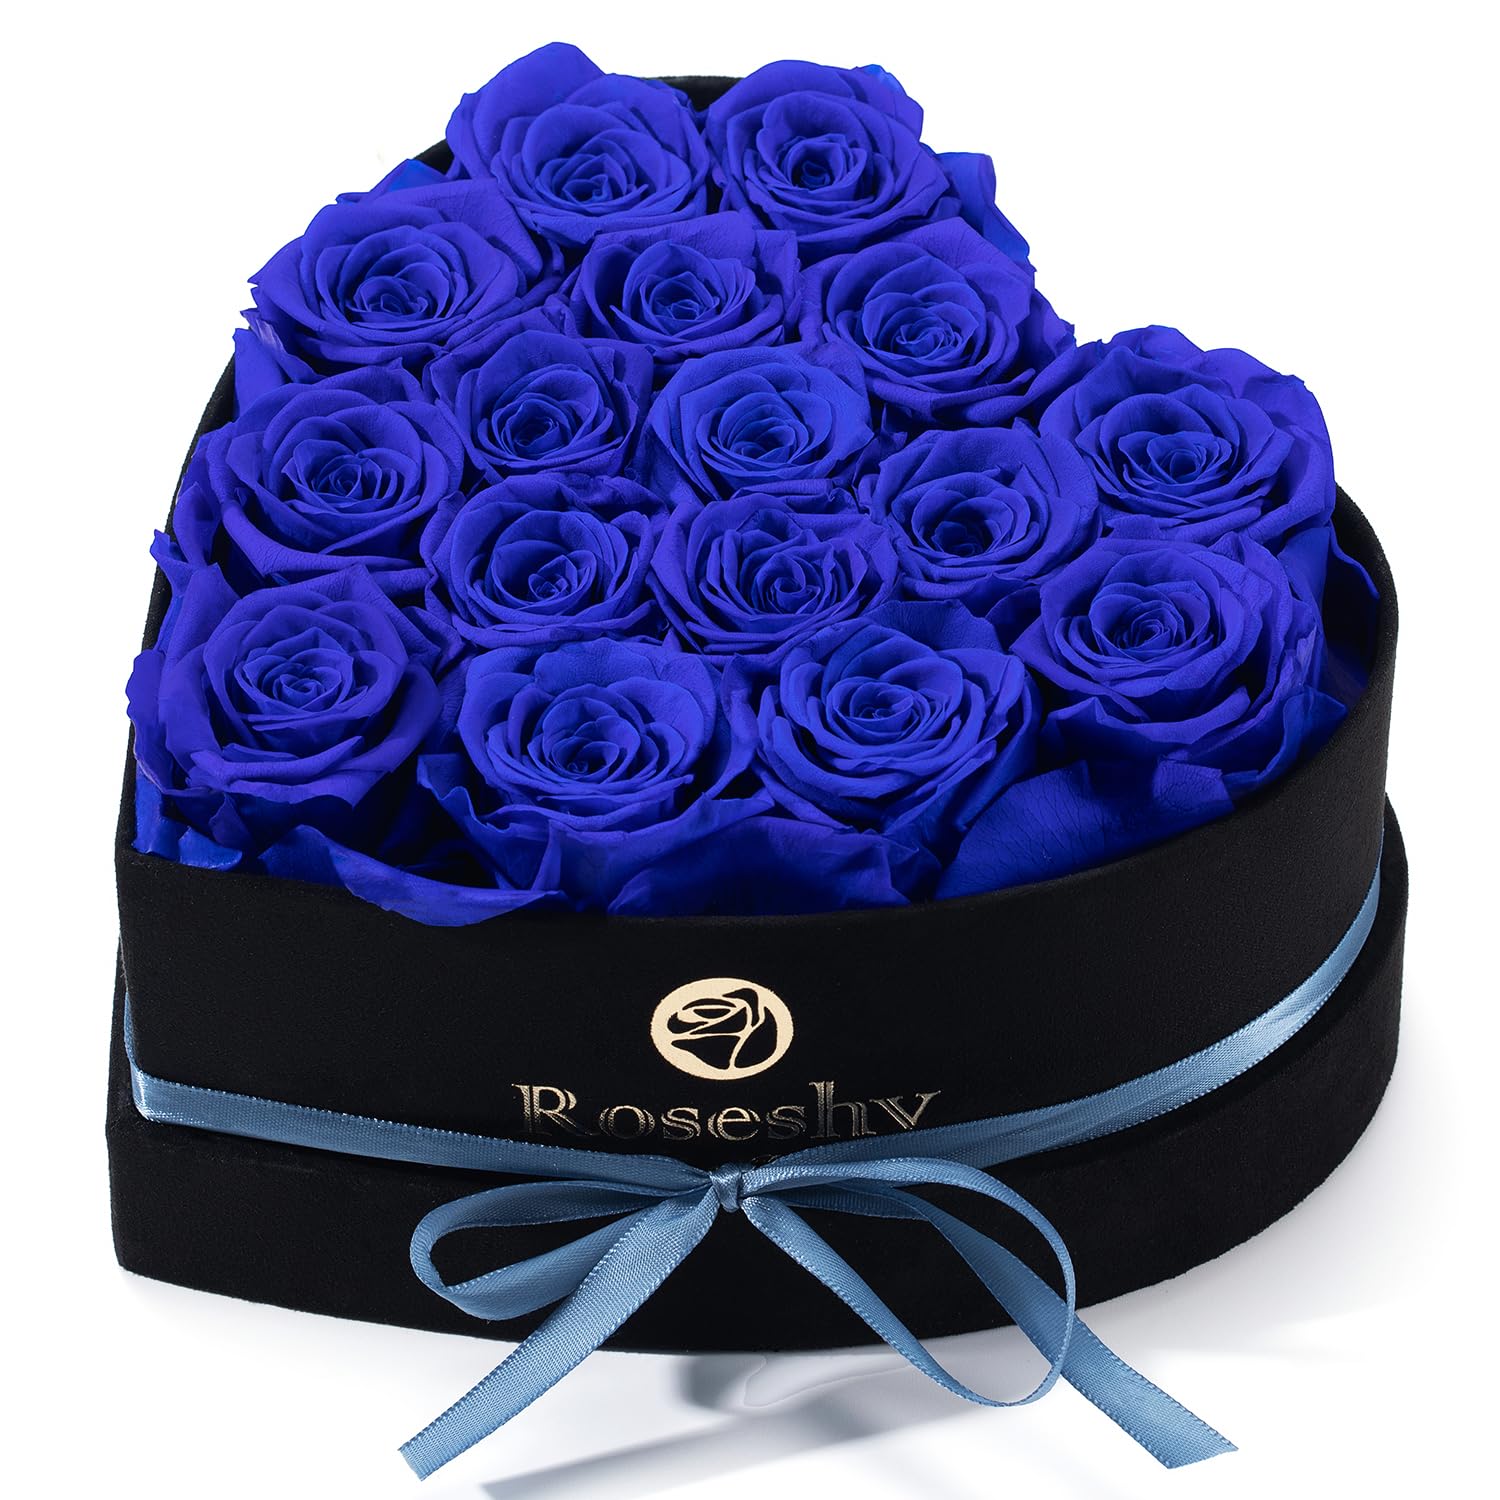 New Product Ideas Eternal Rose Preserved Forever Flowers Heart Shape Box for Mothers Day Valentines Day Novelty Gifts